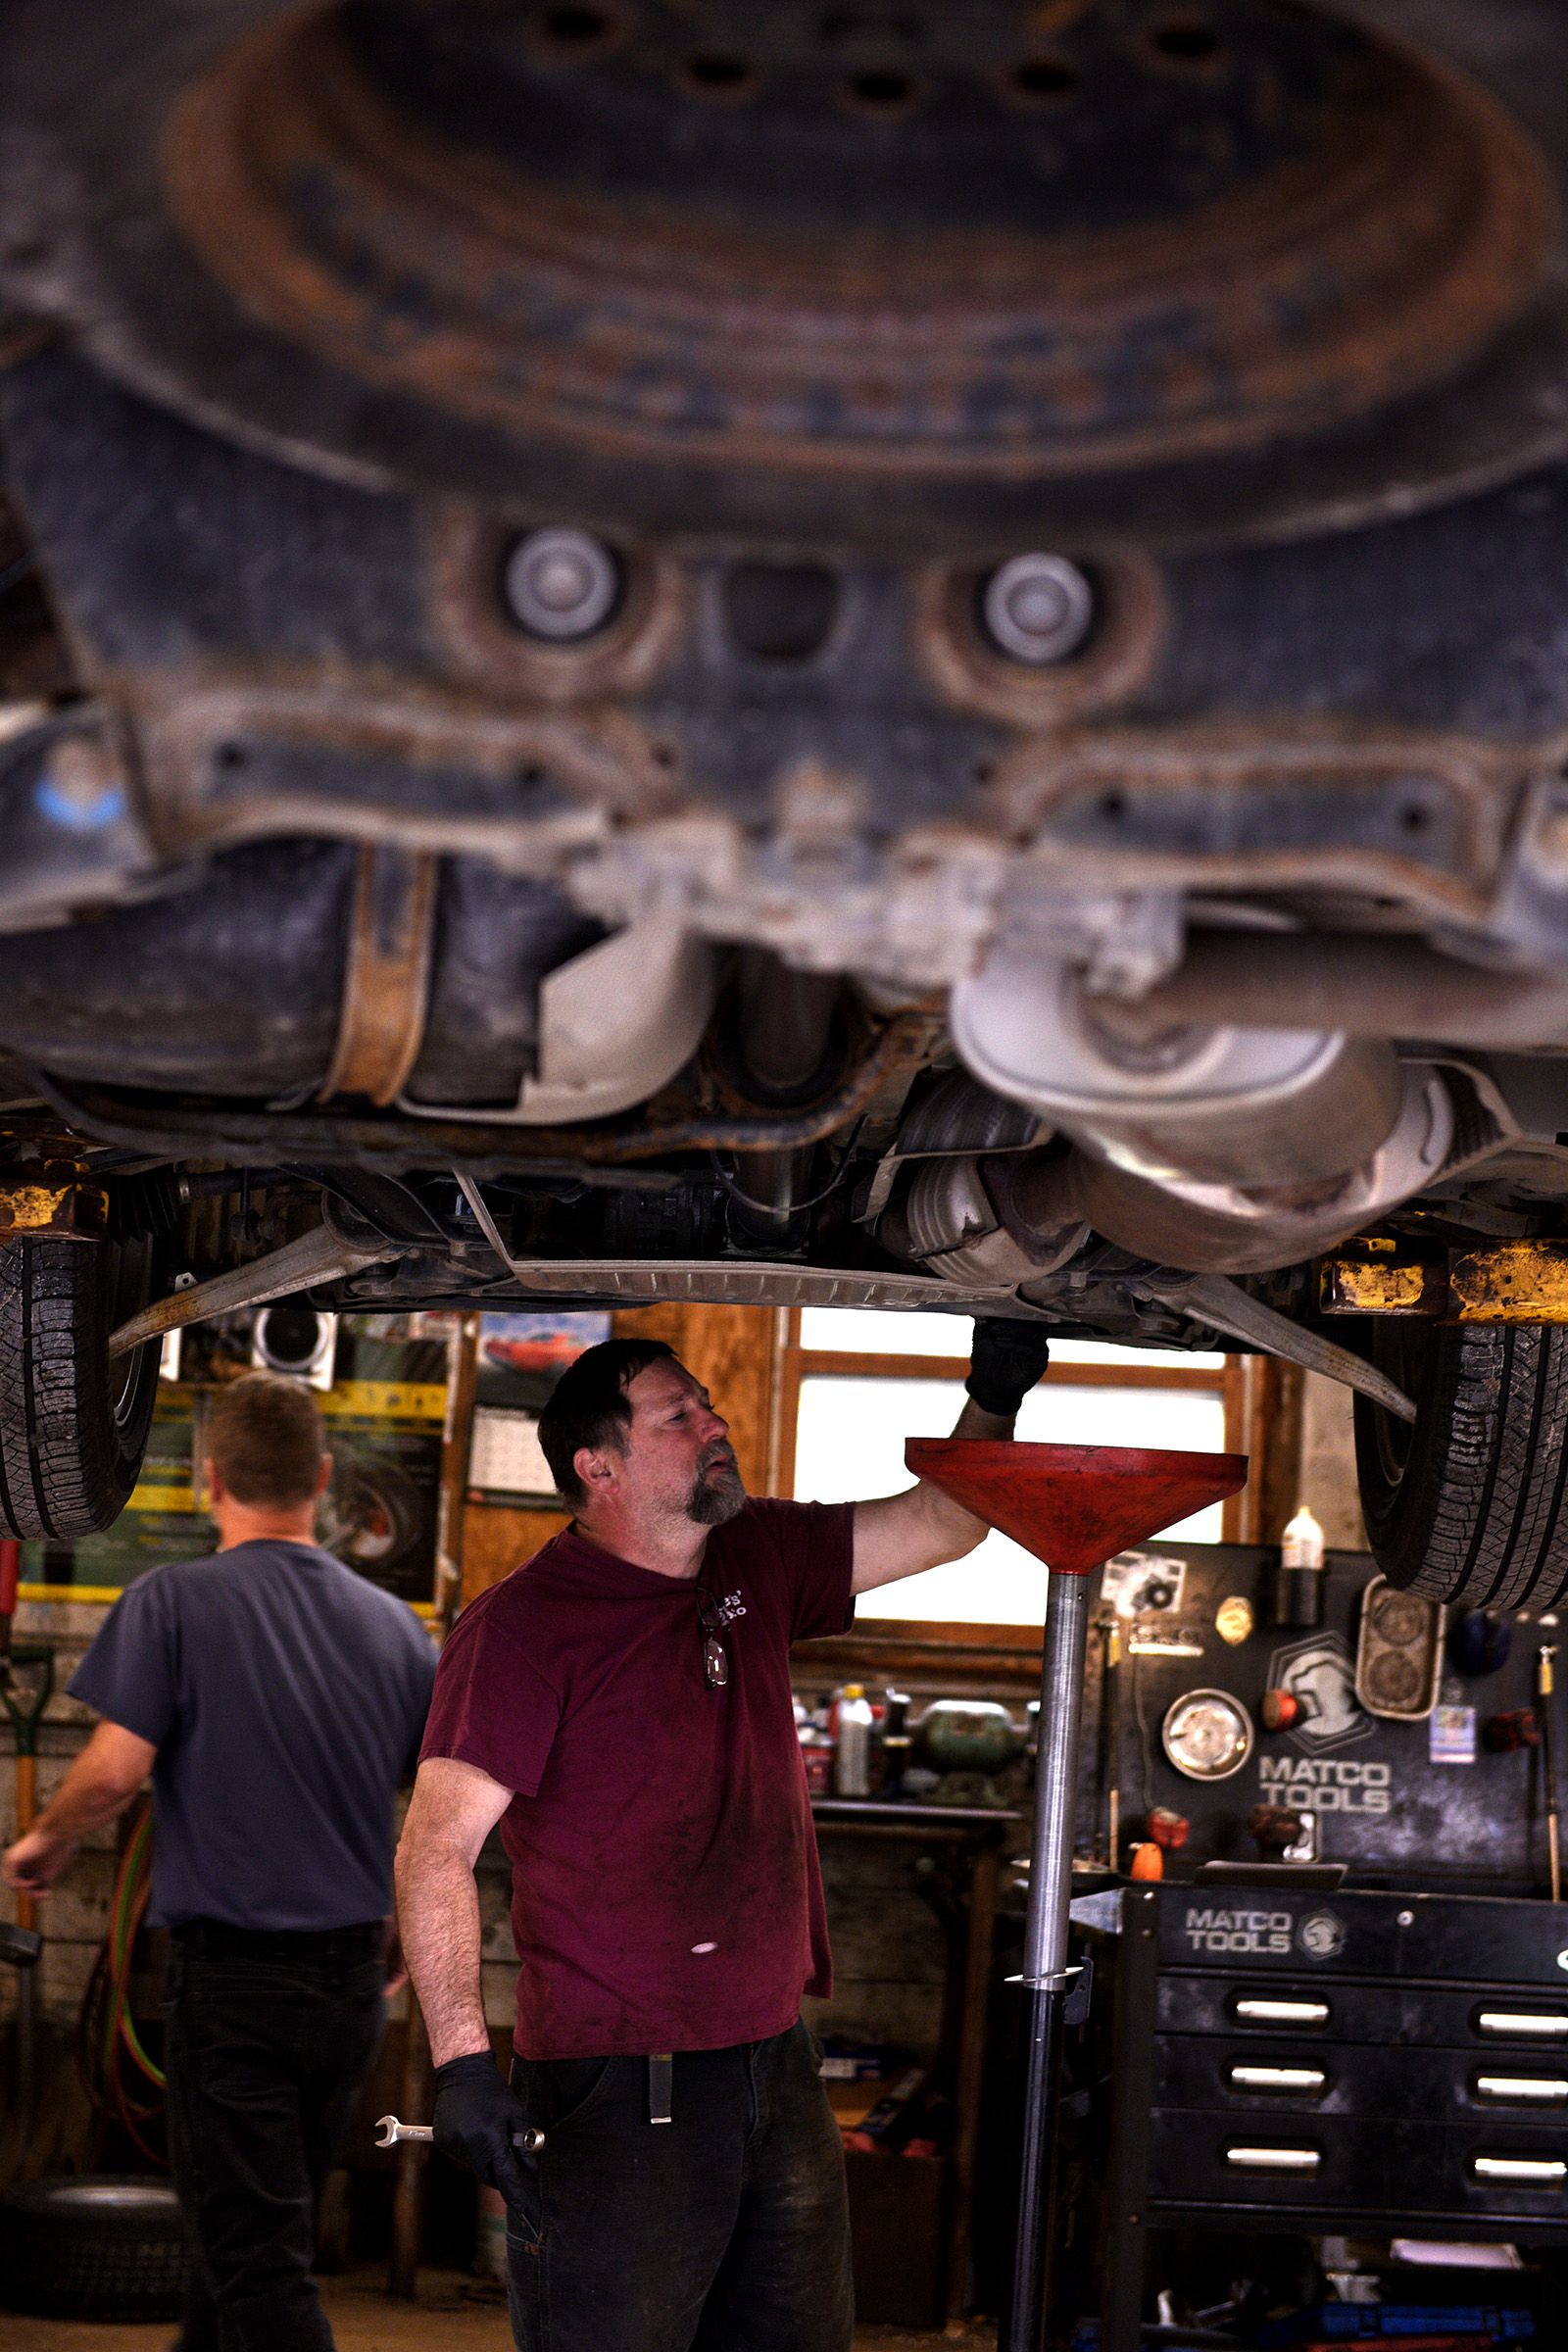 Ray Moses finishes an oil change at Roberts Auto in Lebanon, N.H., on Tuesday, Sept. 28, 2021. Moses has worked at the shop for four years. (Valley News - Jennifer Hauck) Copyright Valley News. May not be reprinted or used online without permission. Send requests to permission@vnews.com.